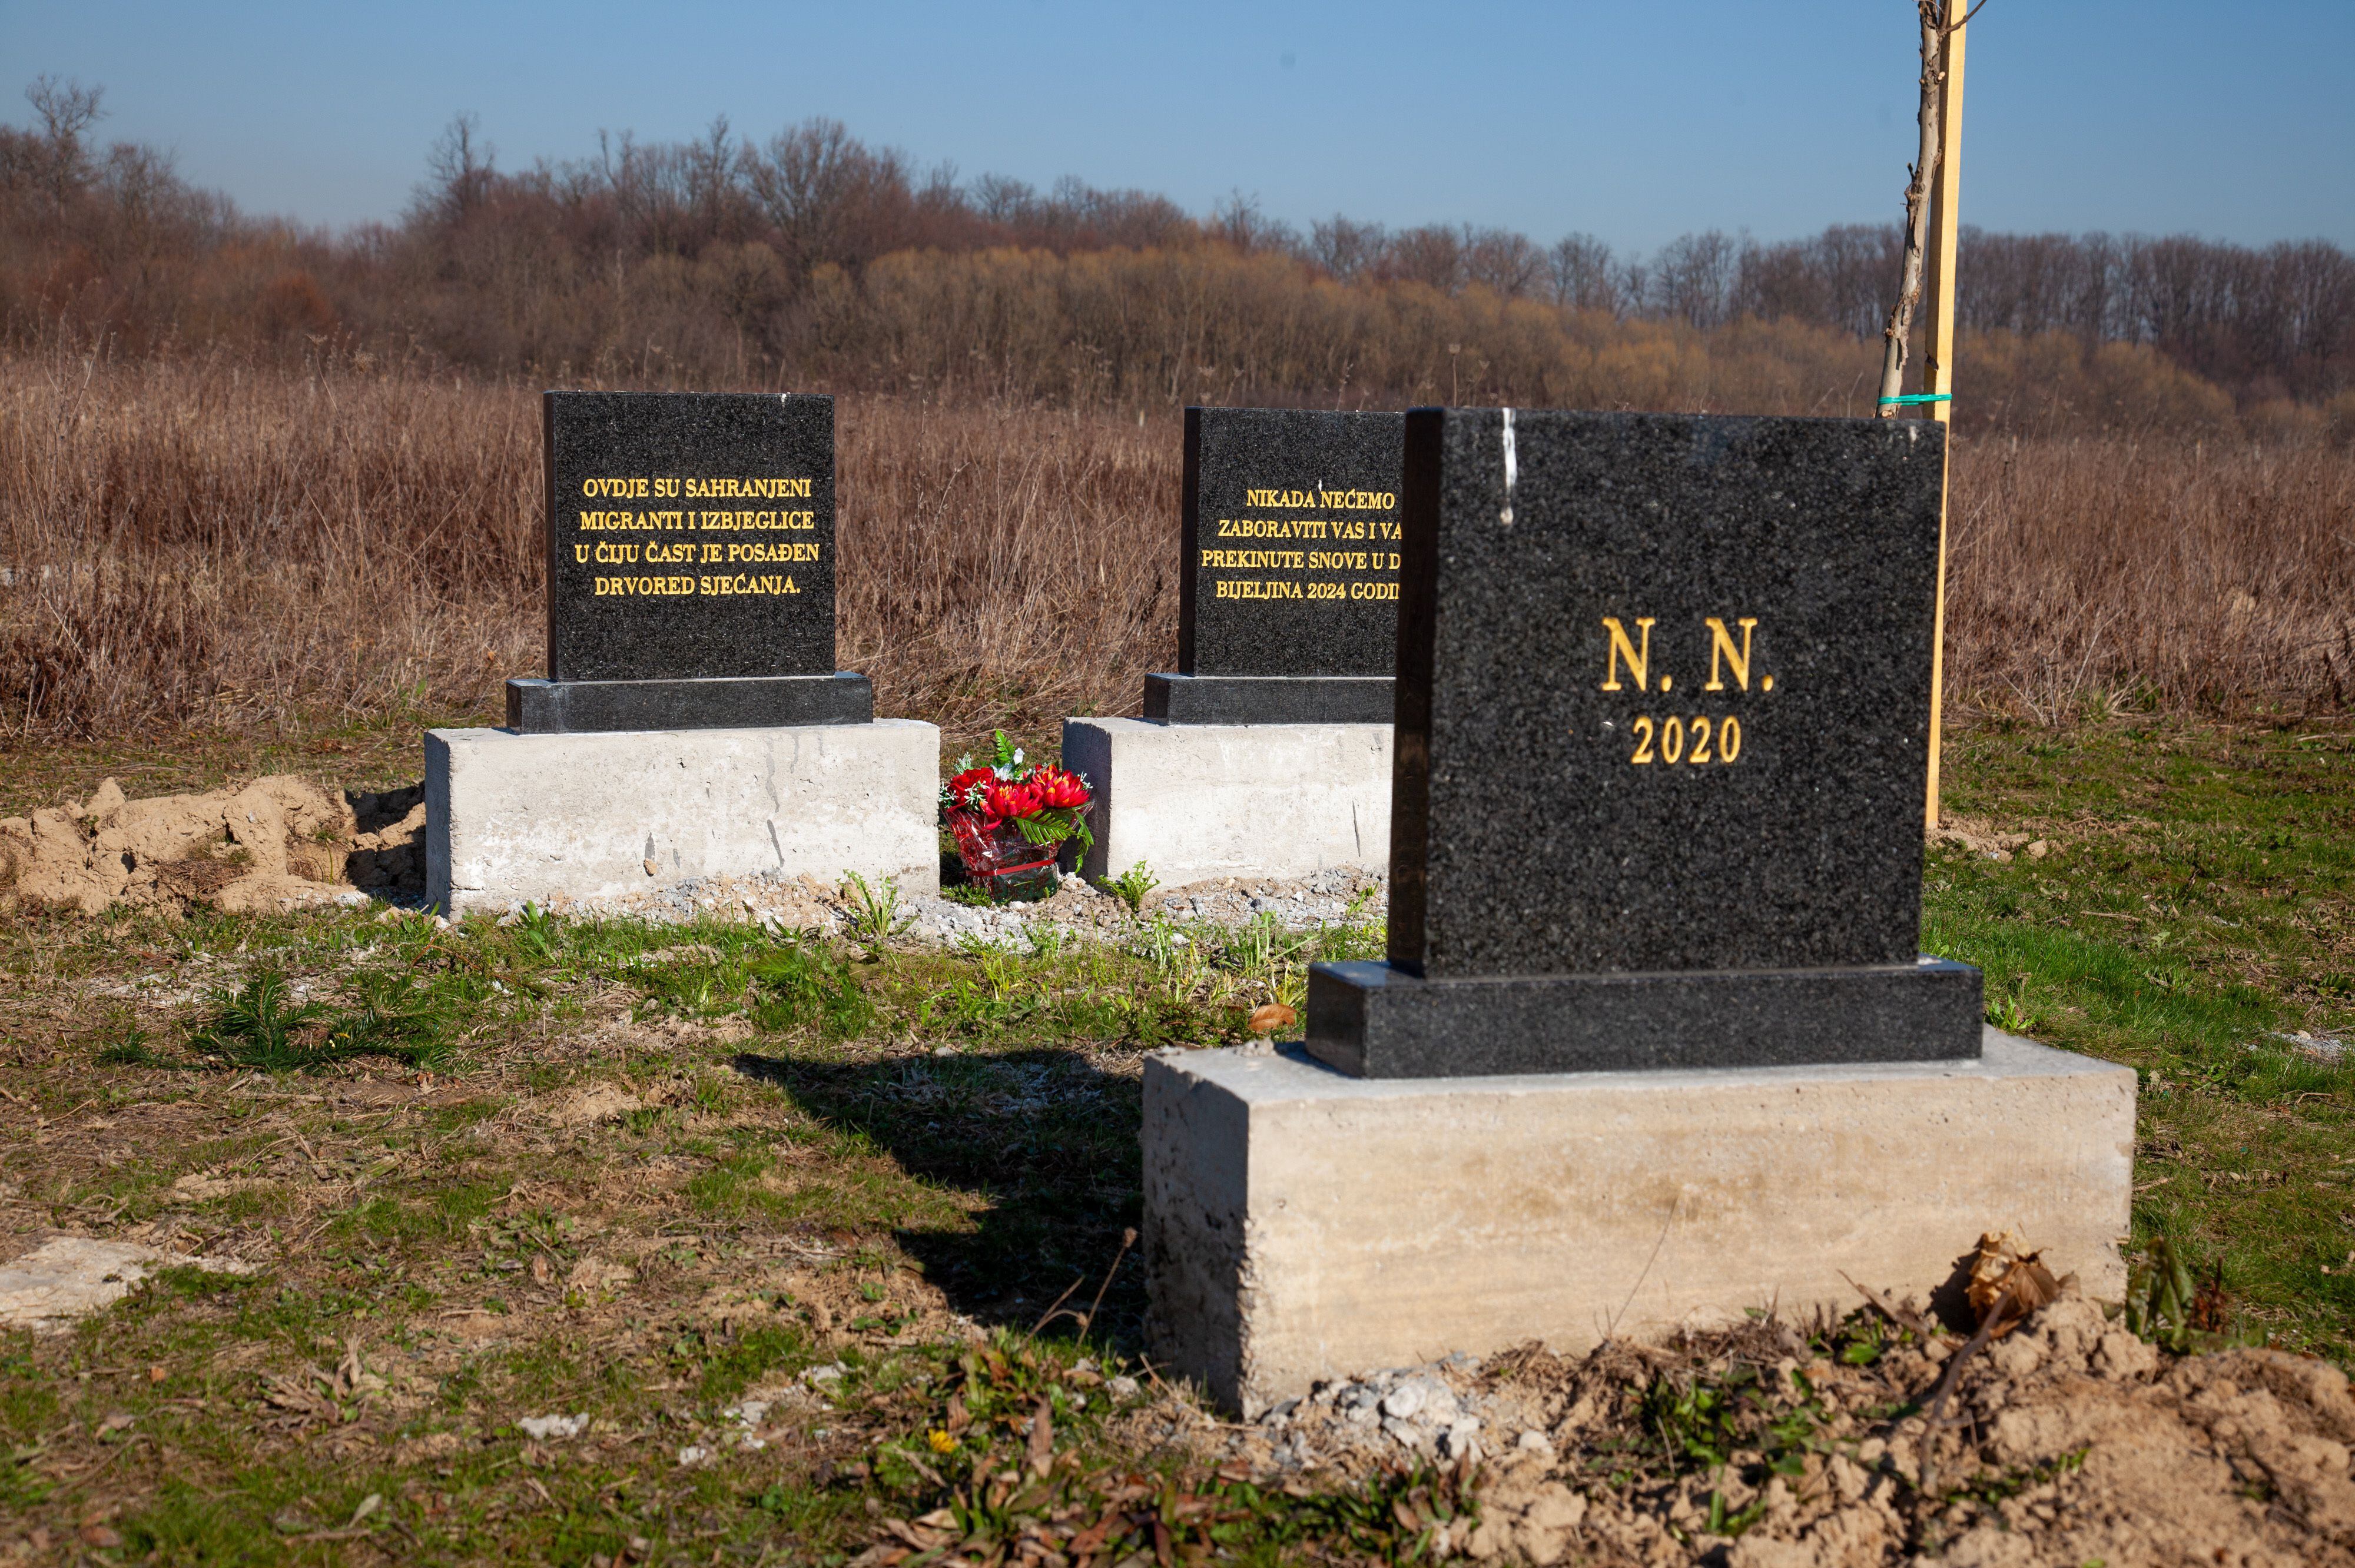 On the far edge of a graveyard in the Bosnian city of Bijeljina, 16 gravestones of migrants are marked with the letters N.N. (standing for 